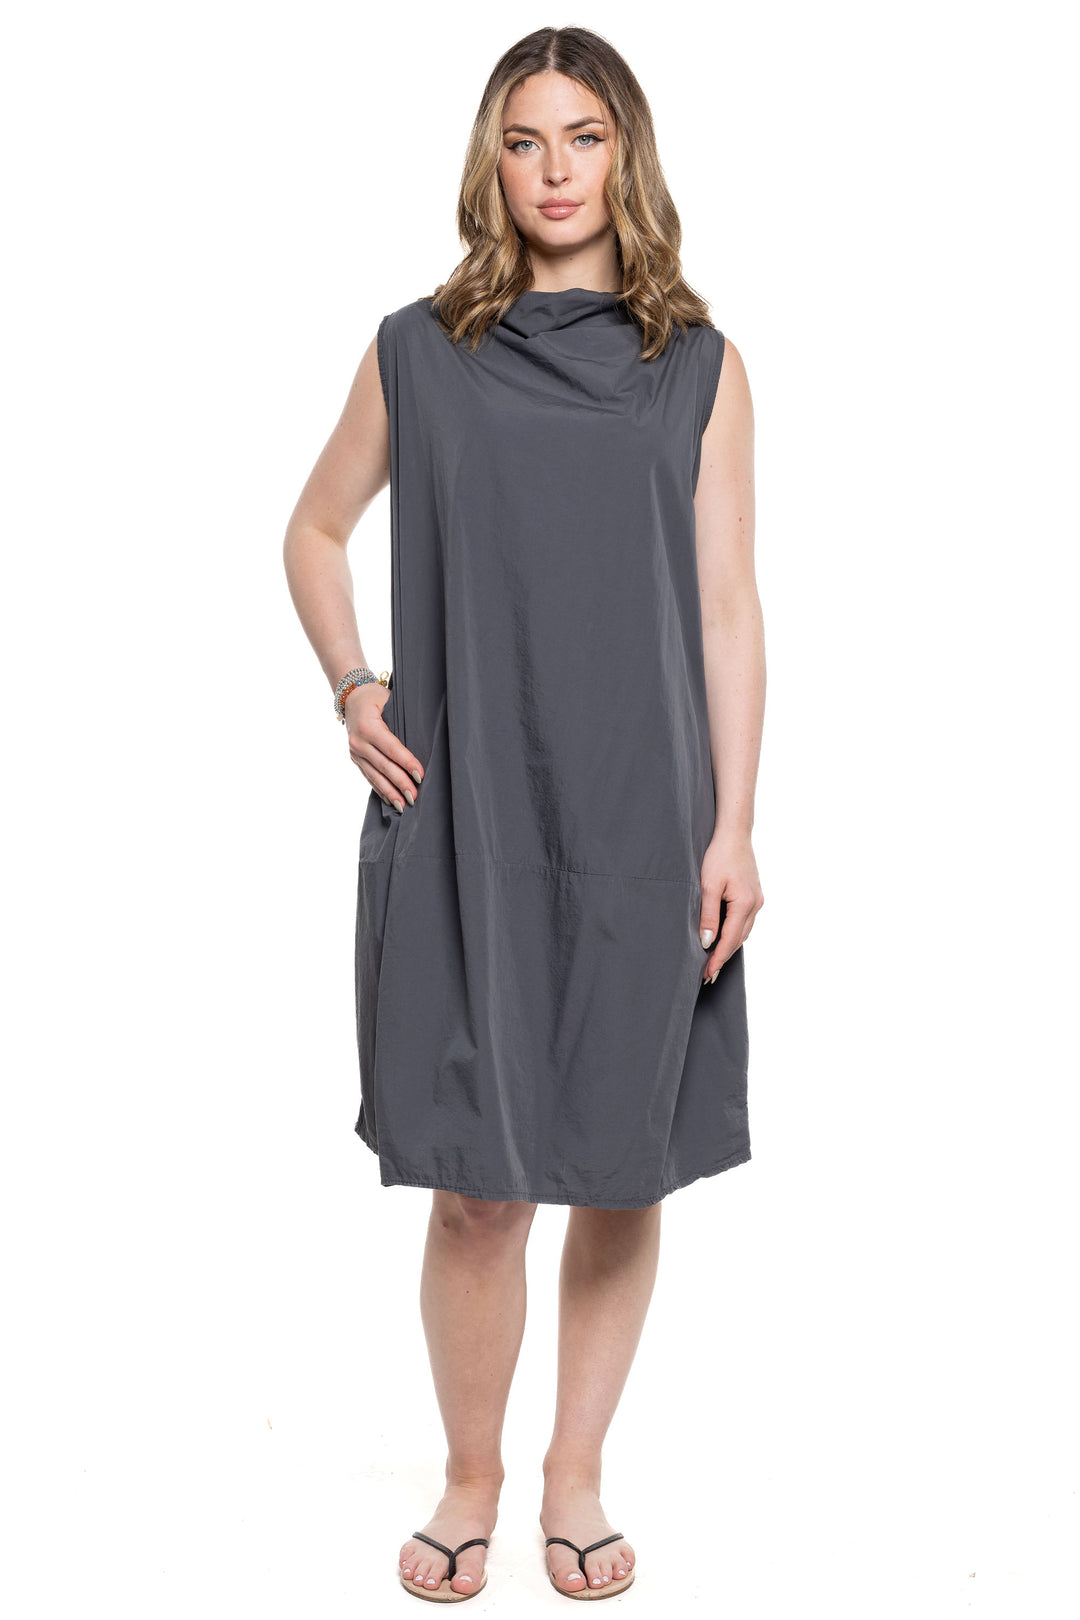 Etern Elle Summer 2024 The soft balloon shape and drape cowl neck add a touch of elegance, while the relaxed fit and side pockets provide comfort and convenience.